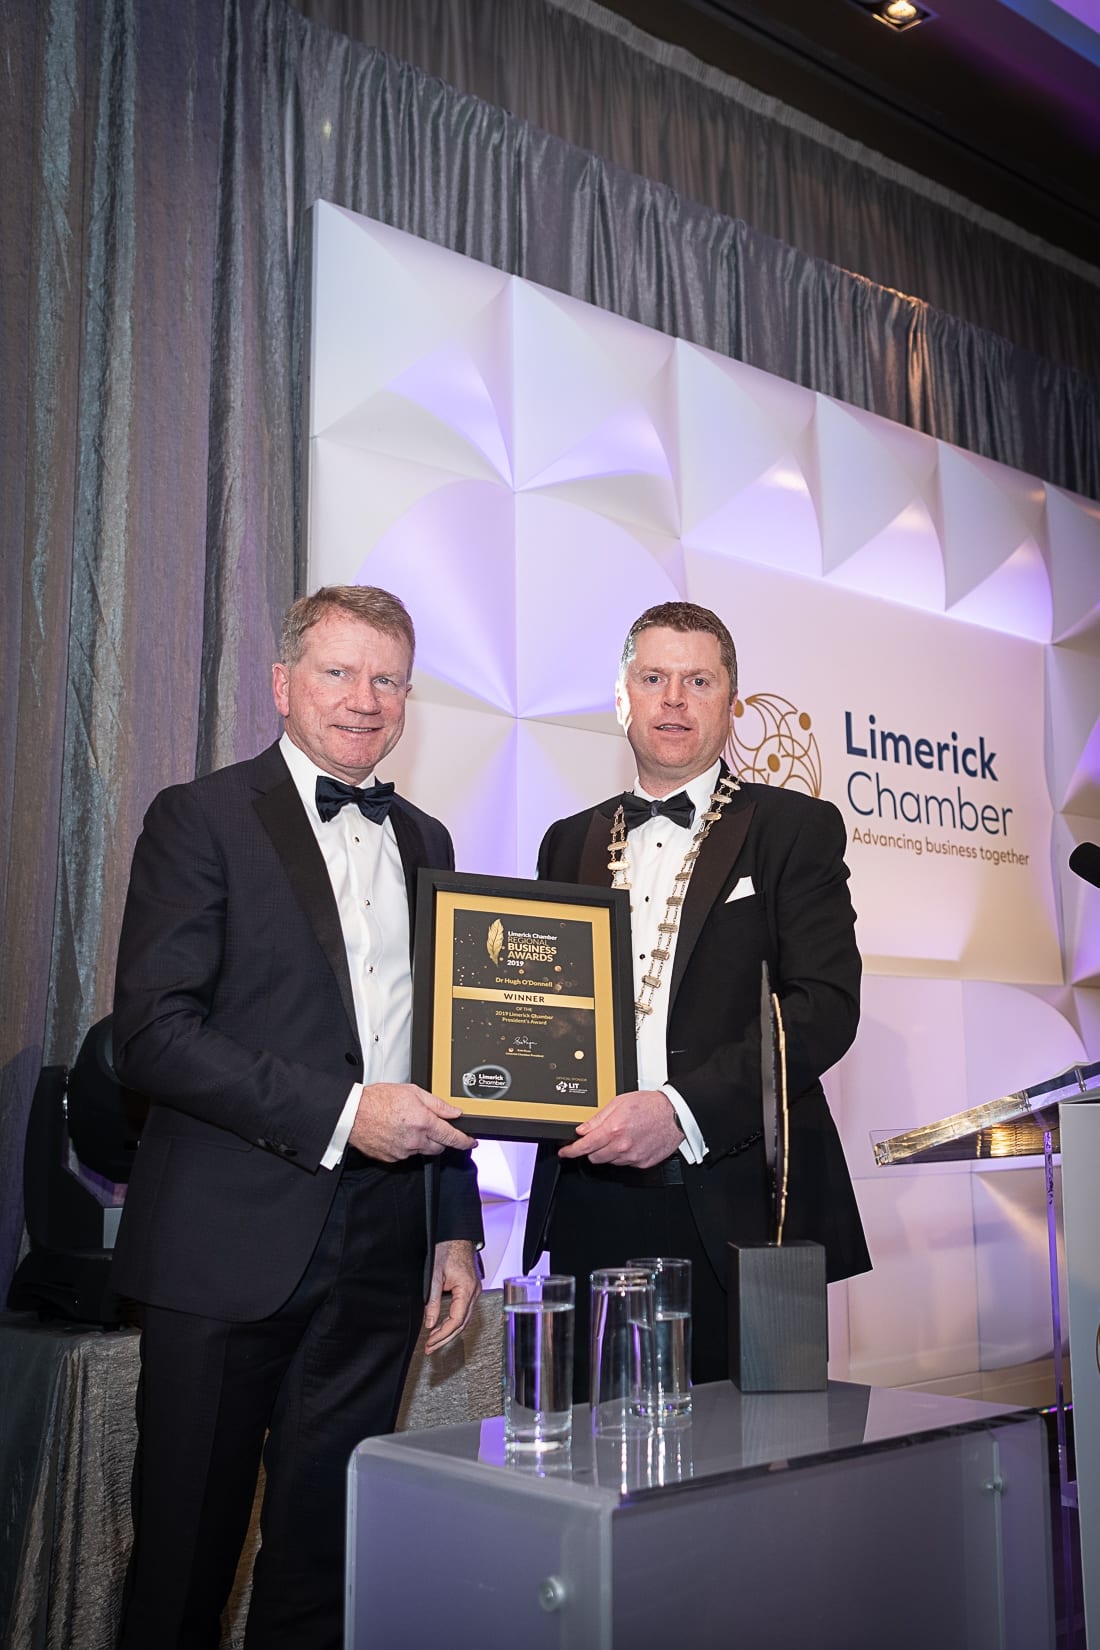 No repro fee-Limerick Chamber President’s Dinner
and Limerick Chamber Regional Business Awards 2019 which was held in the Strand Hotel on Friday 15th November /President Award/  - From Left to Right: Dr Hugh O’Donnell - Winner, Eoin Ryan - President Limerick Chamber, 
Photo credit Shauna Kennedy